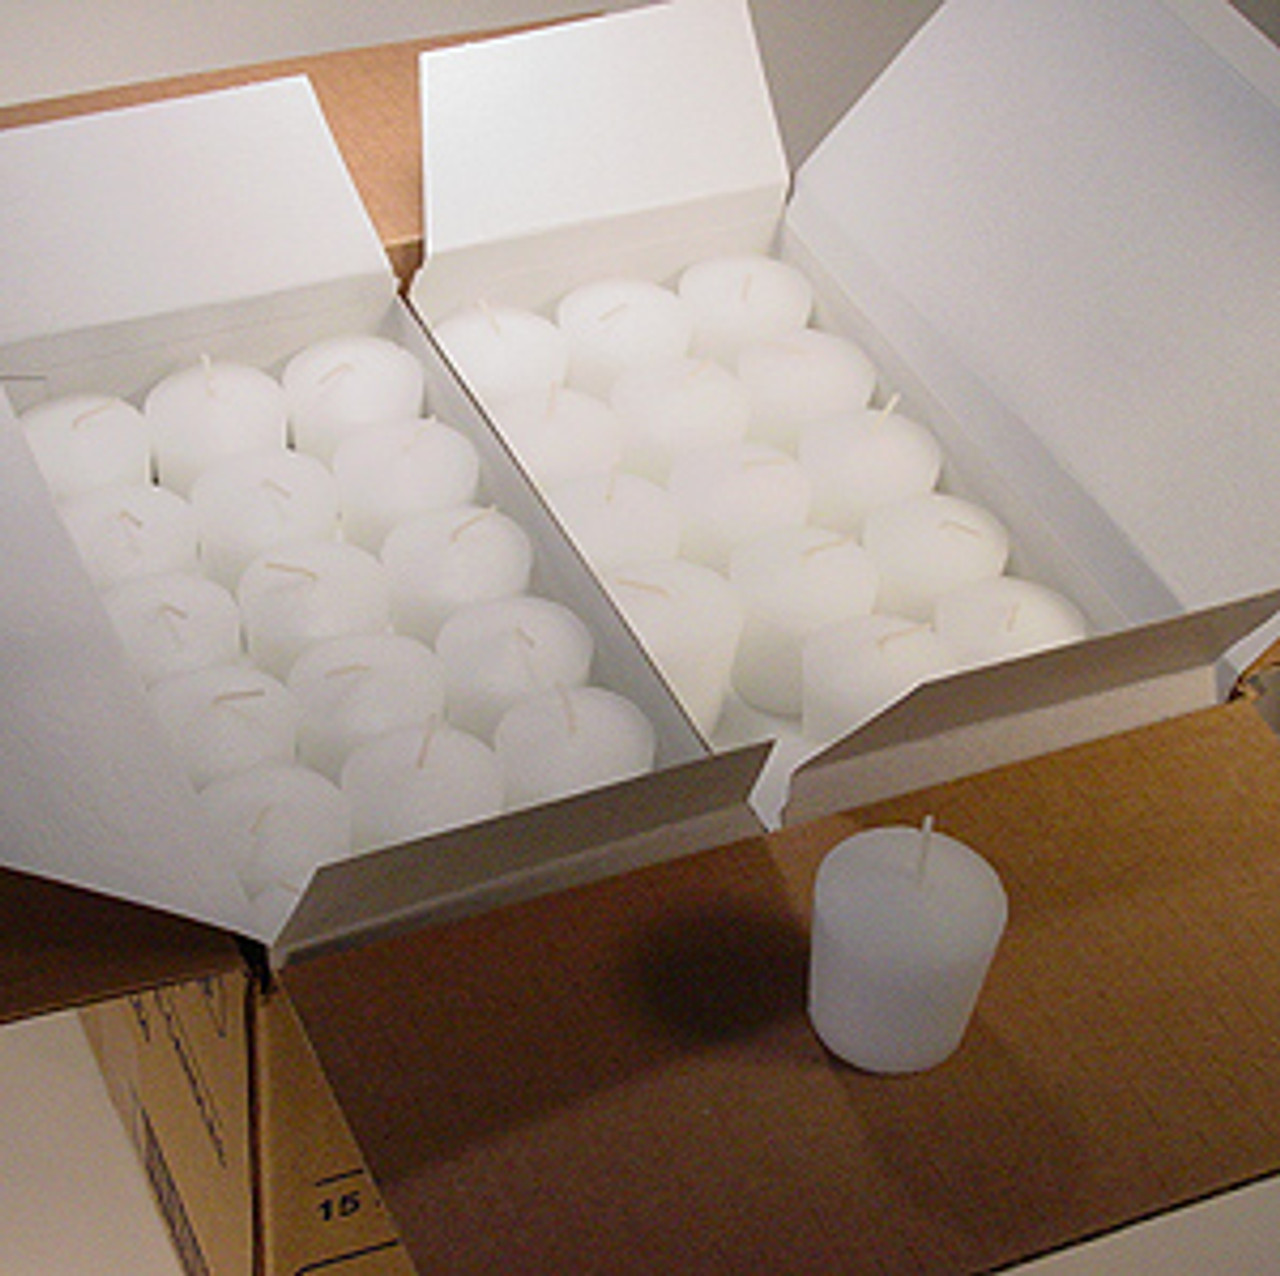 15 Hour Unscented Emergency And Events Bulk Votive Candles For Wedding  Votives, Luminary Candles, Restaurants, Churches, Bars, Parties, Spa and  Decorations (Set of 36, 15 Hour) - D'light Online Inc